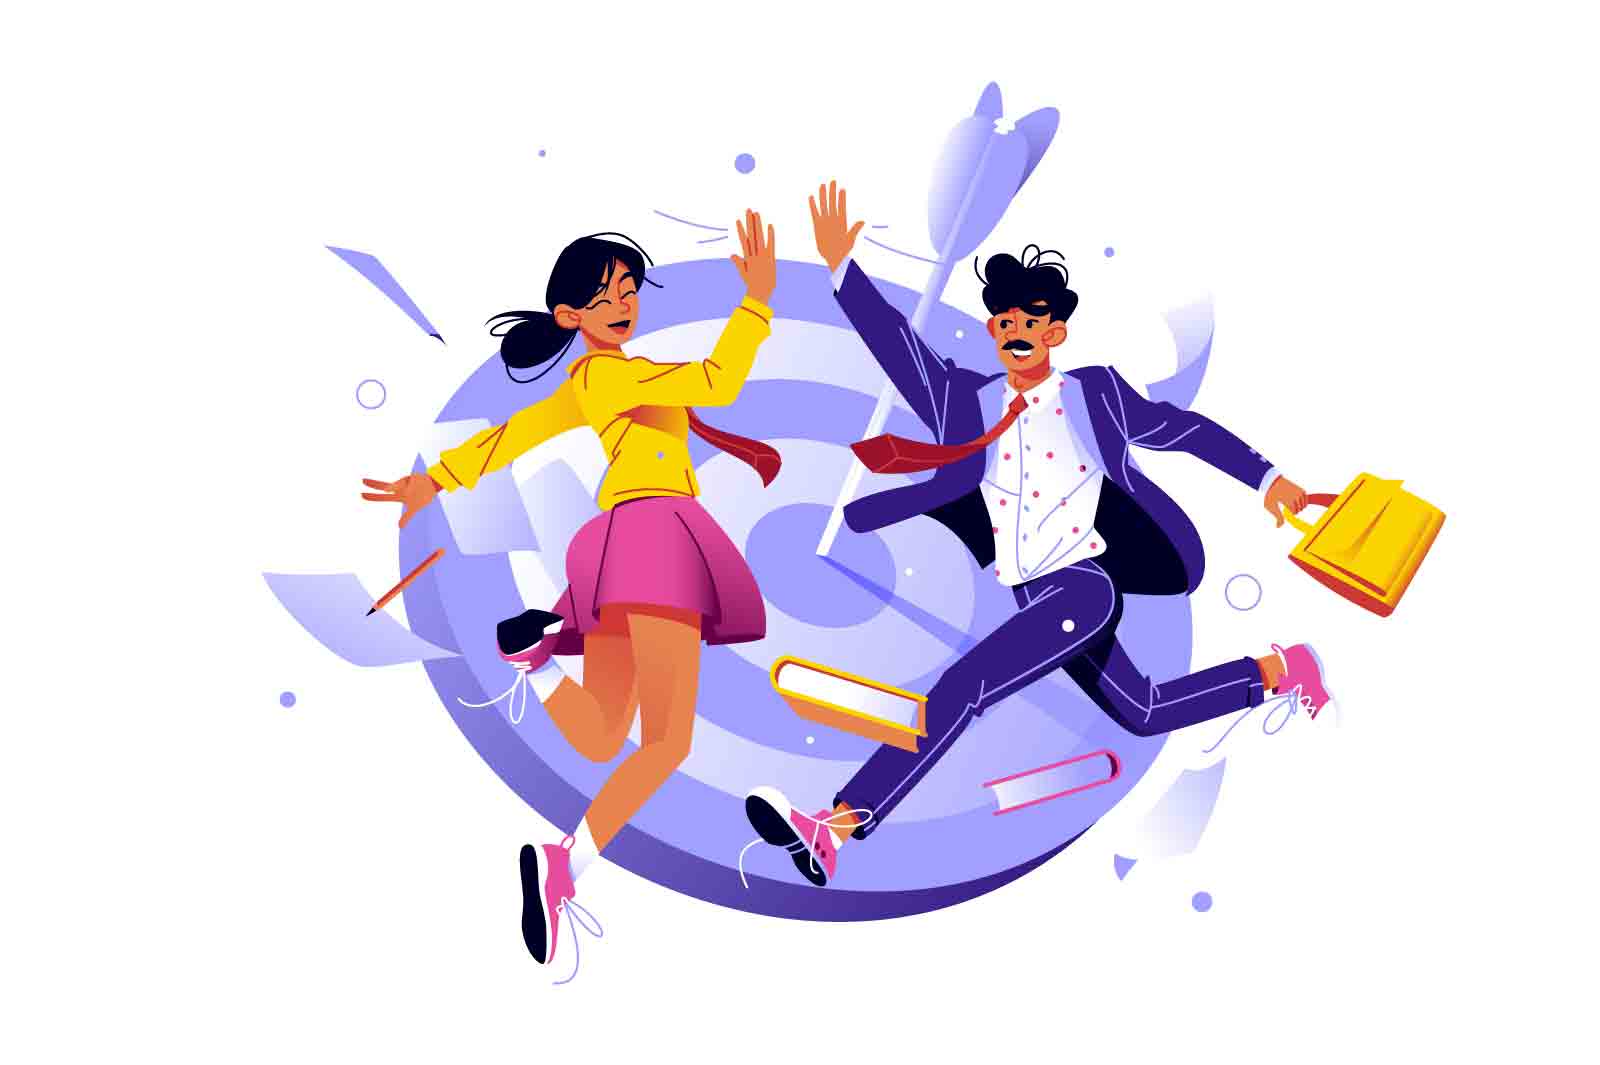 Man and woman colleagues jumping and giving high five vector illustration. Good job flat style concept. Team celebration winning and goal achievement idea